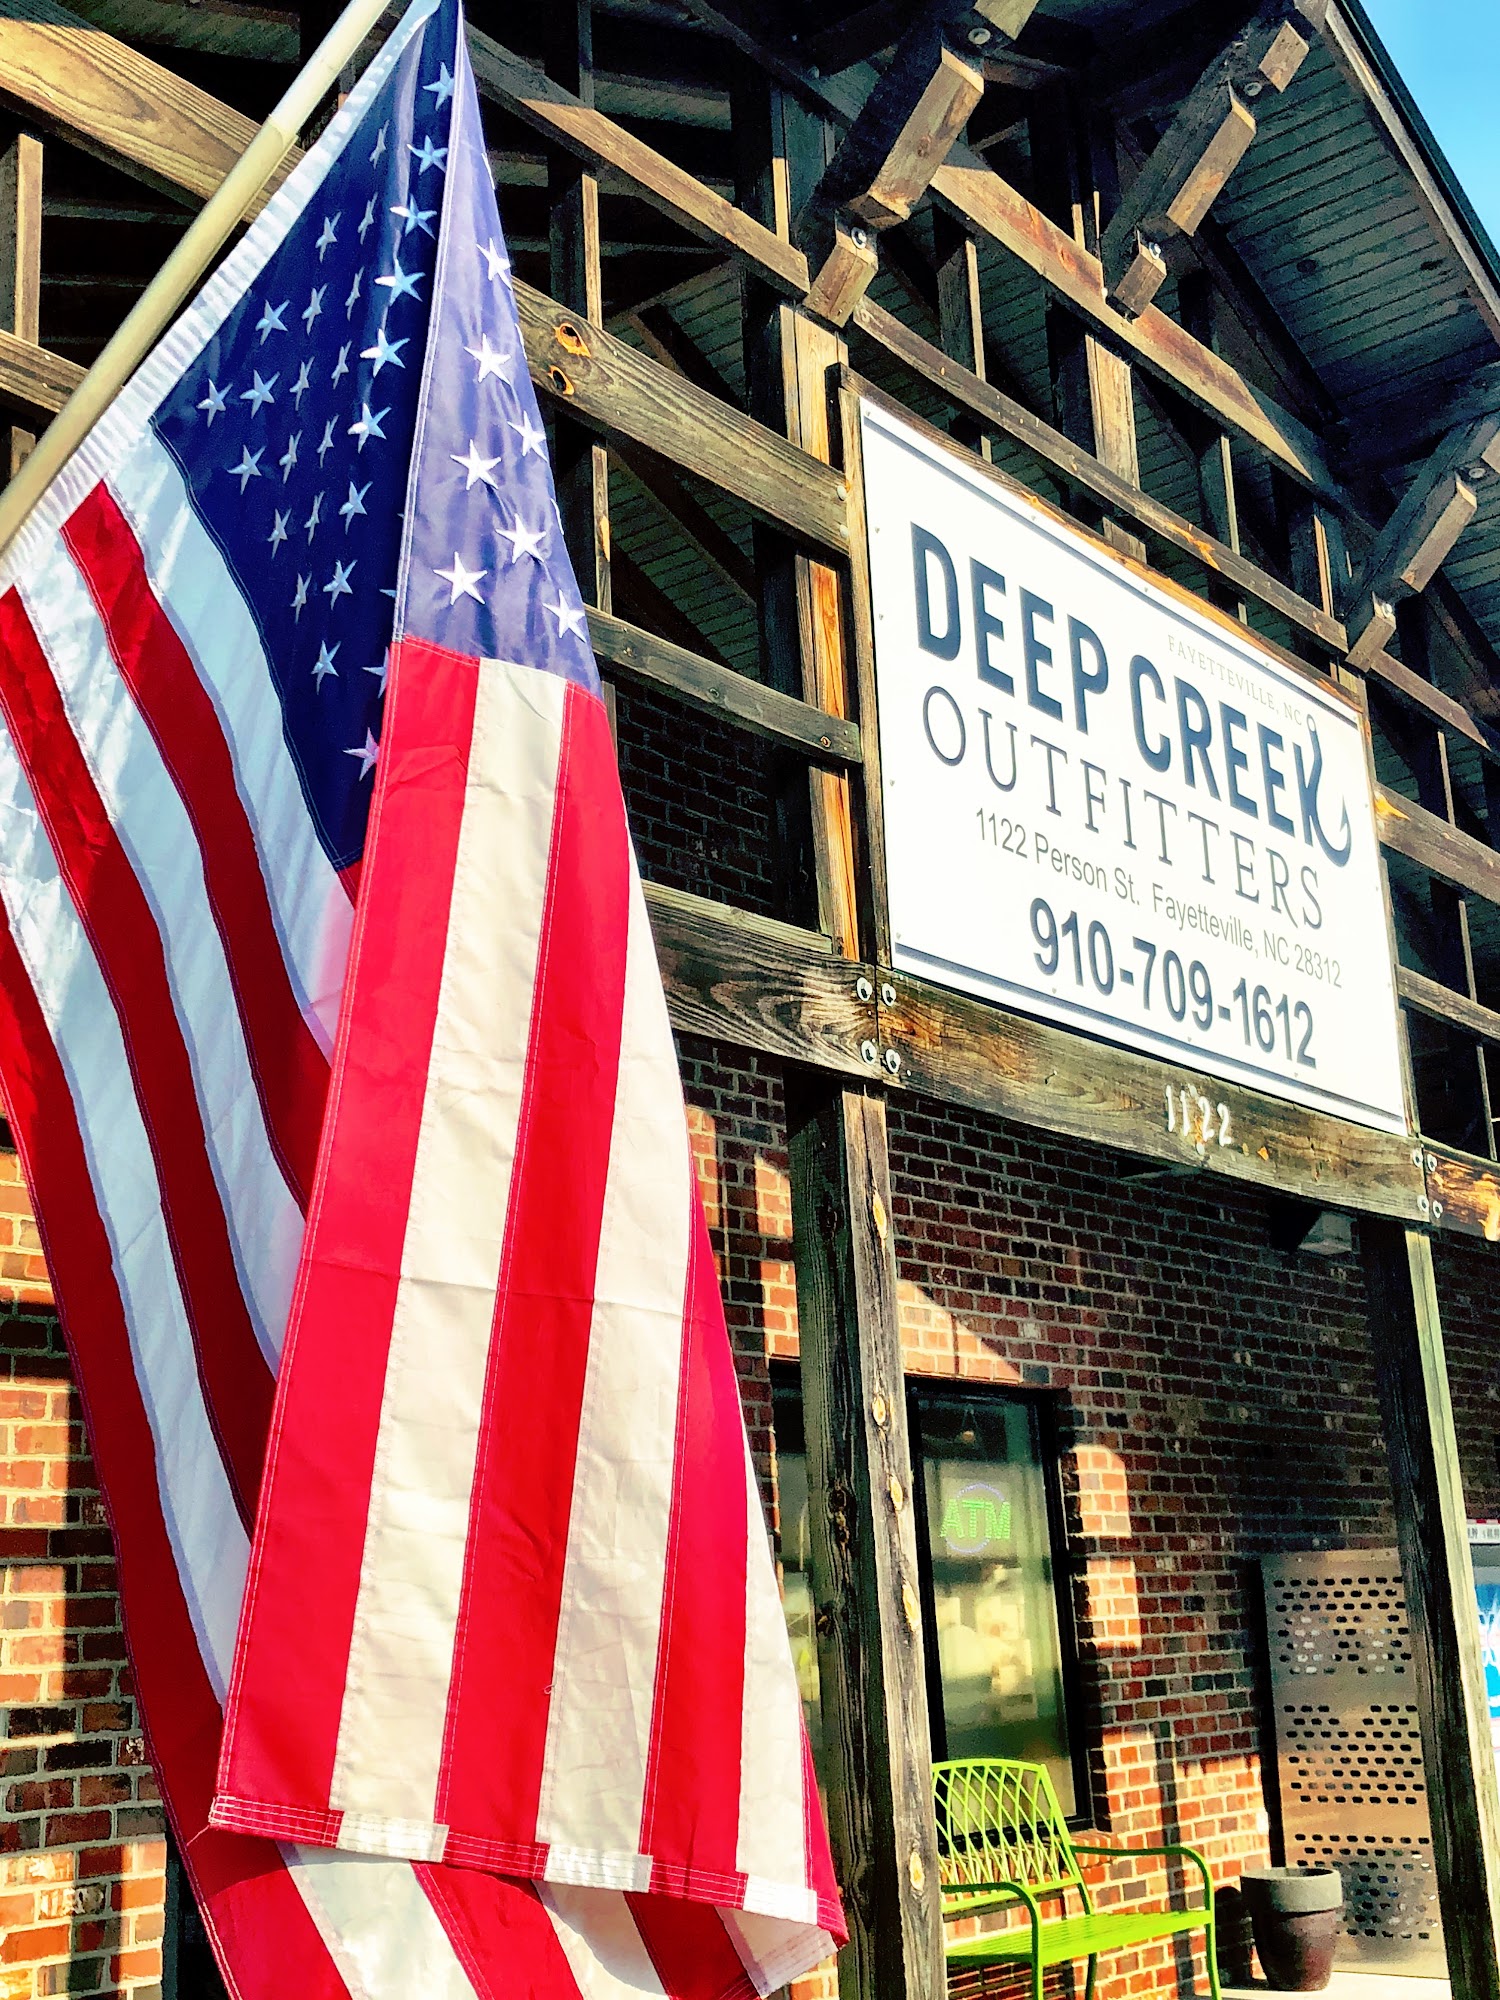 Deep Creek Outfitters